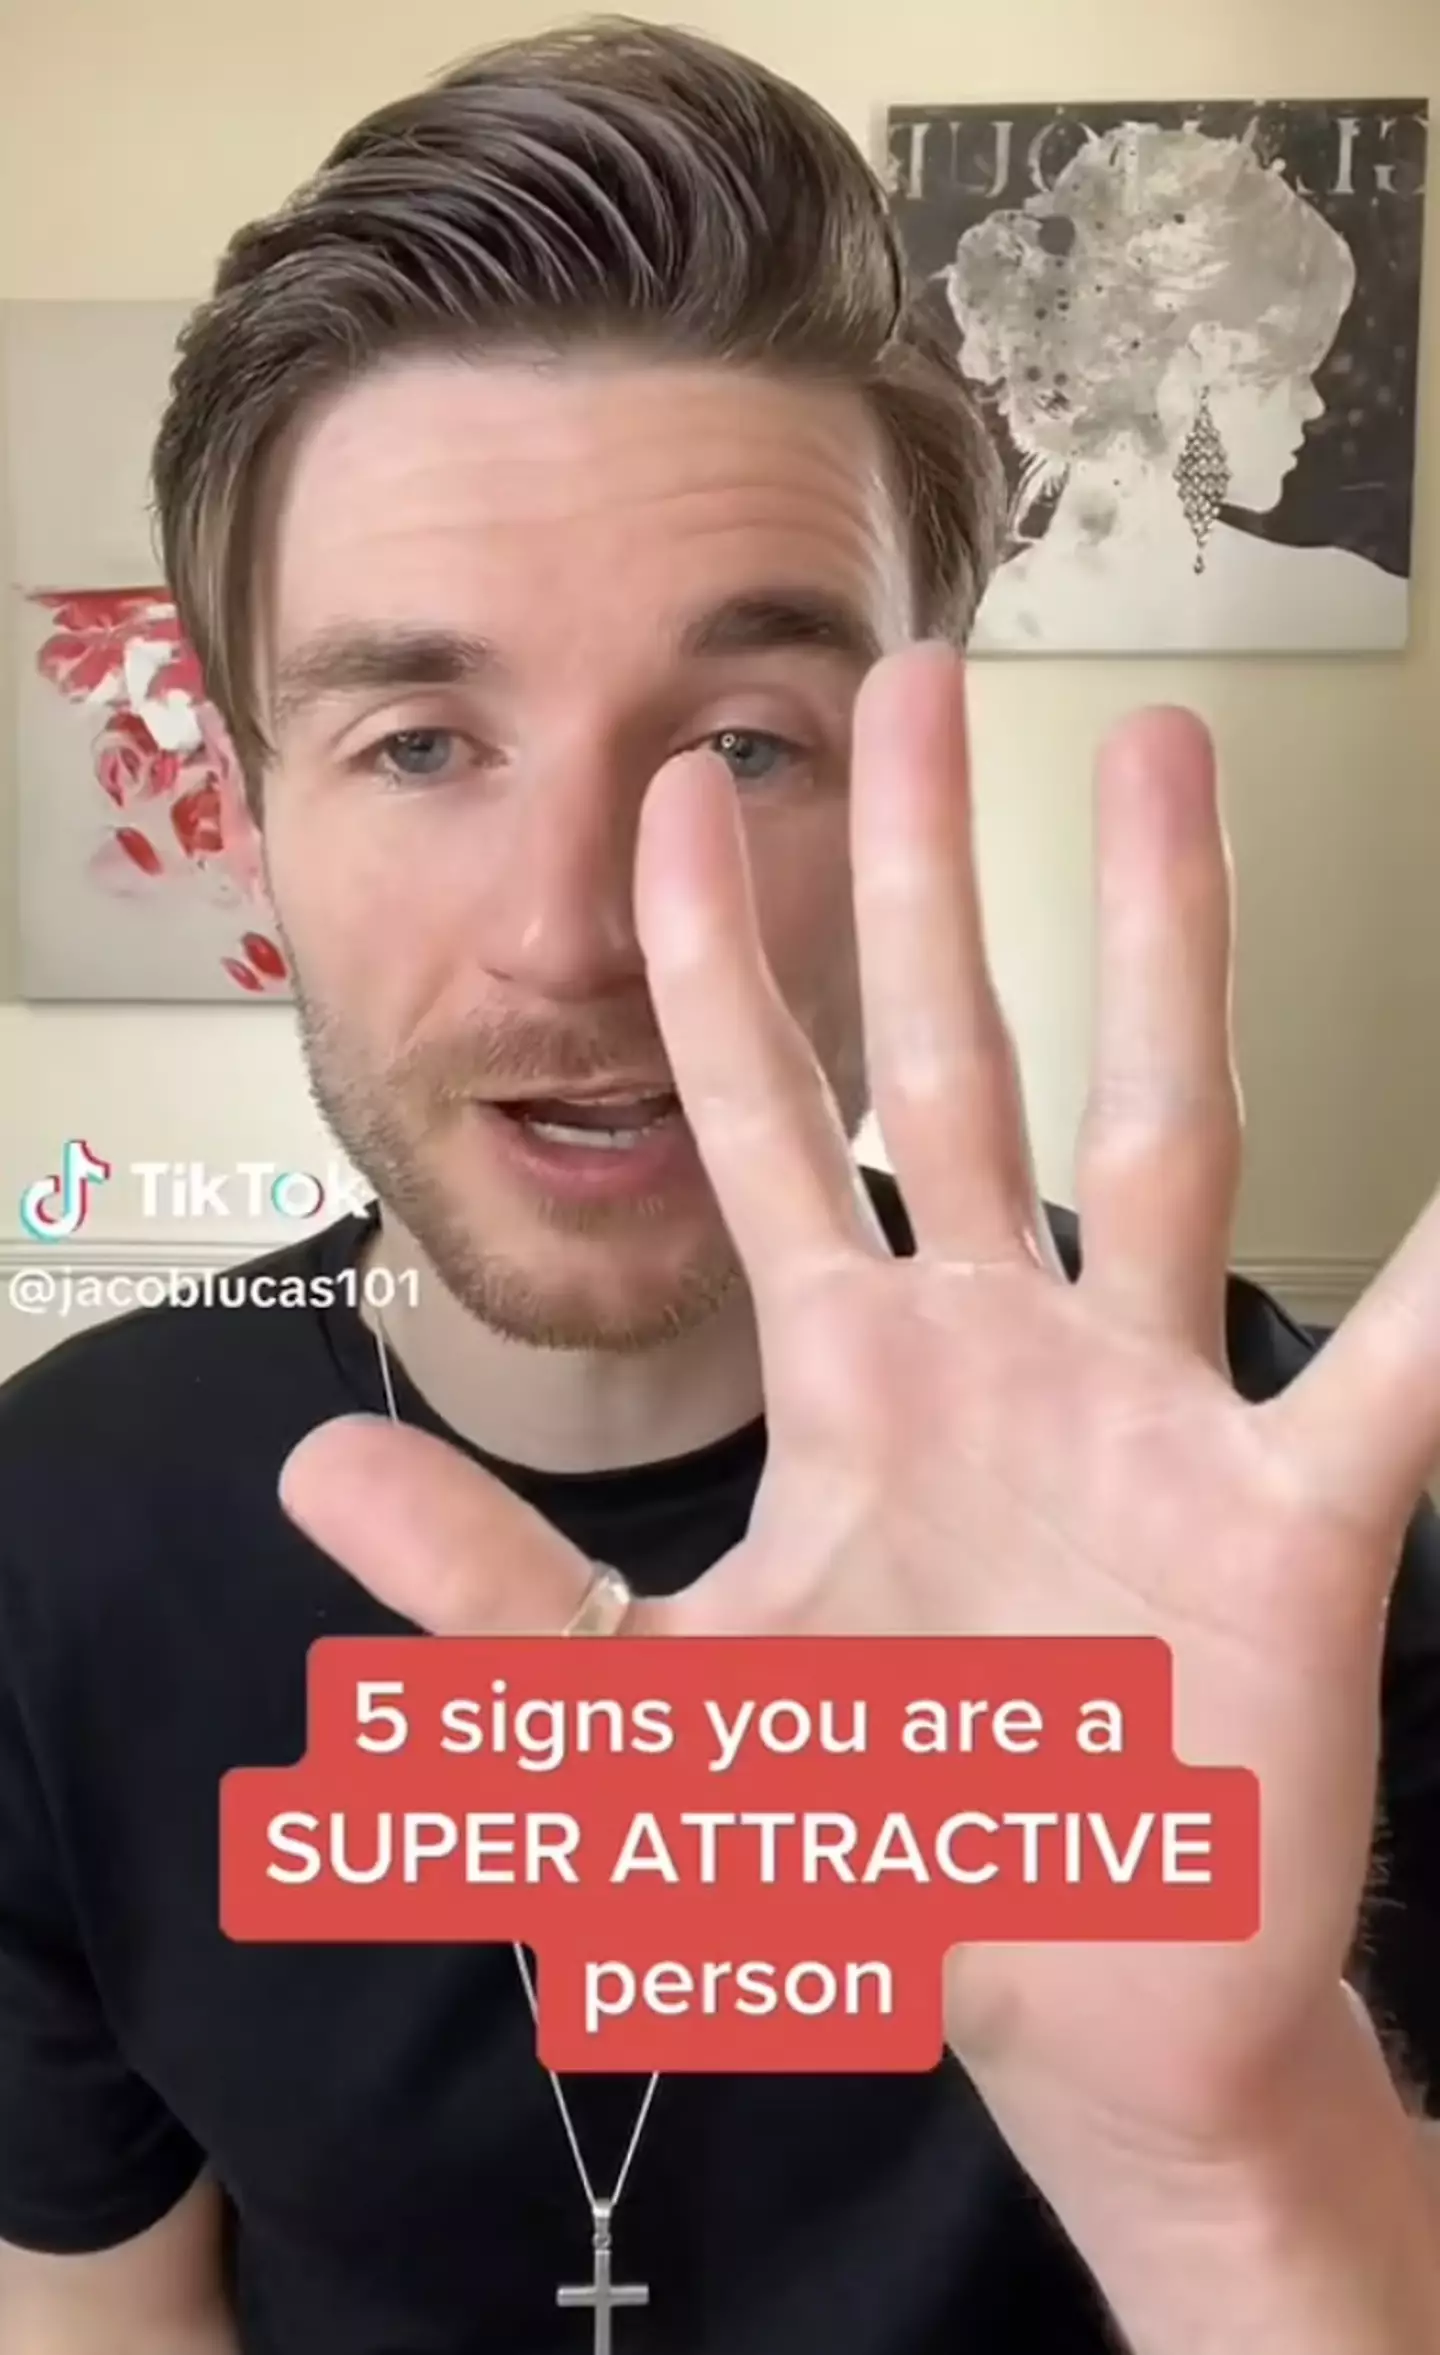 Dating coach Jacob Lucas shares the five signs to spot if you’re super attractive.